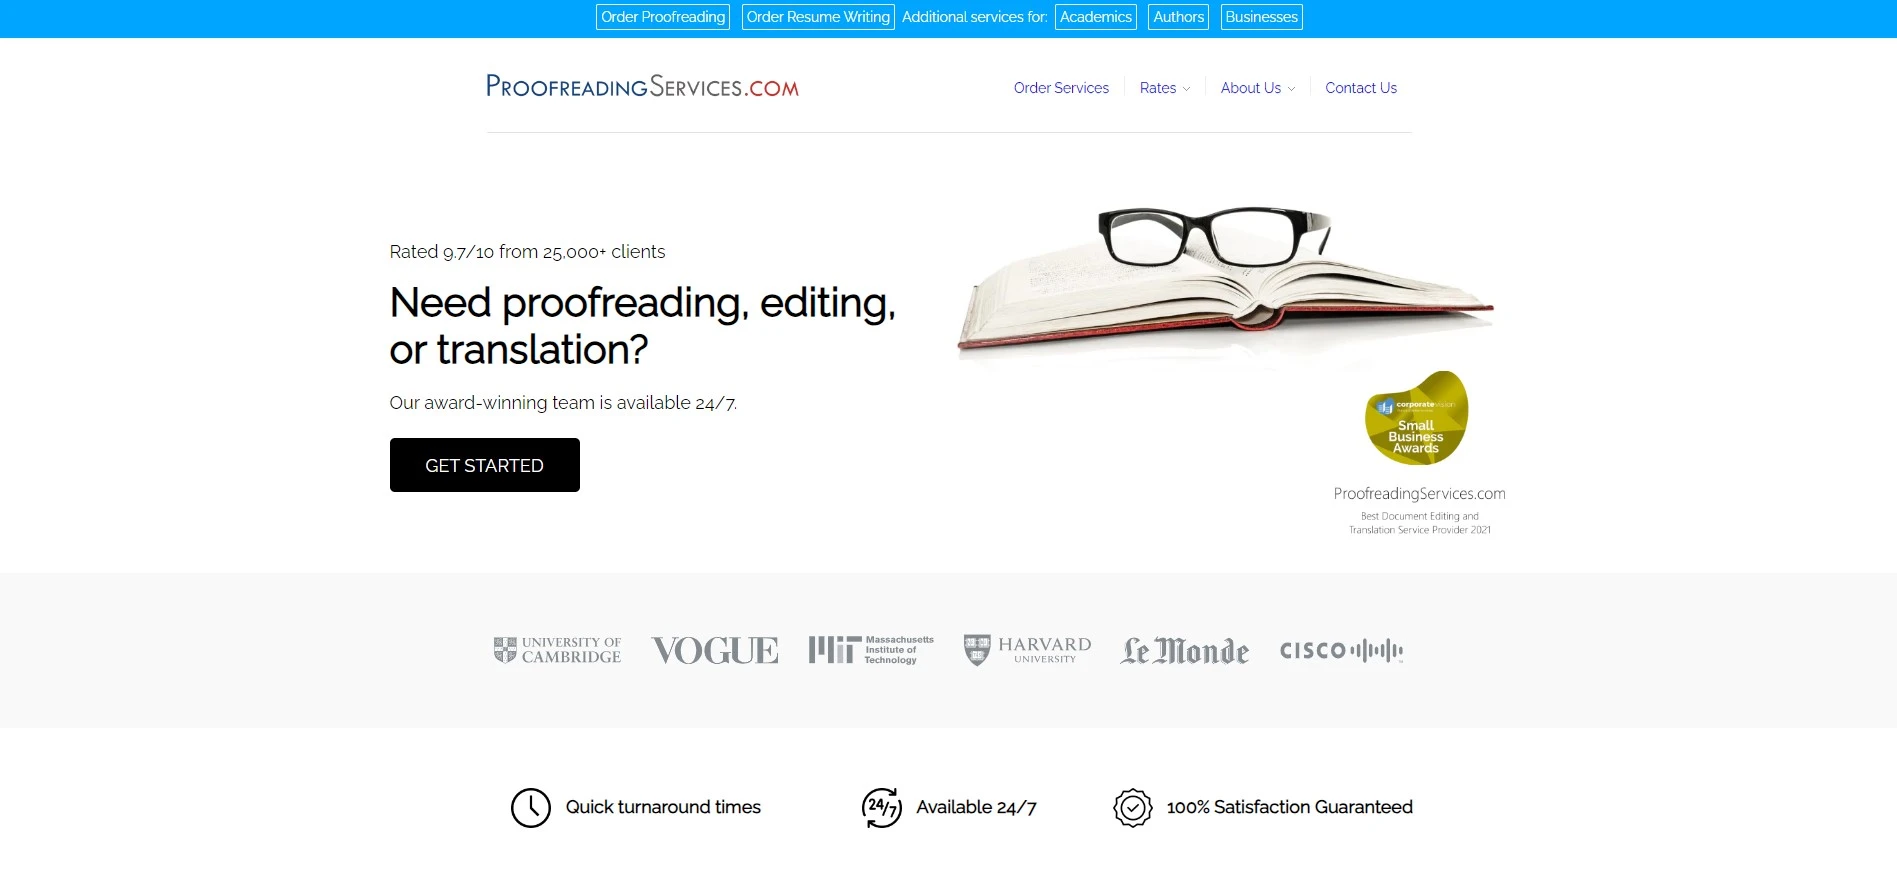 Proofreading Services.com